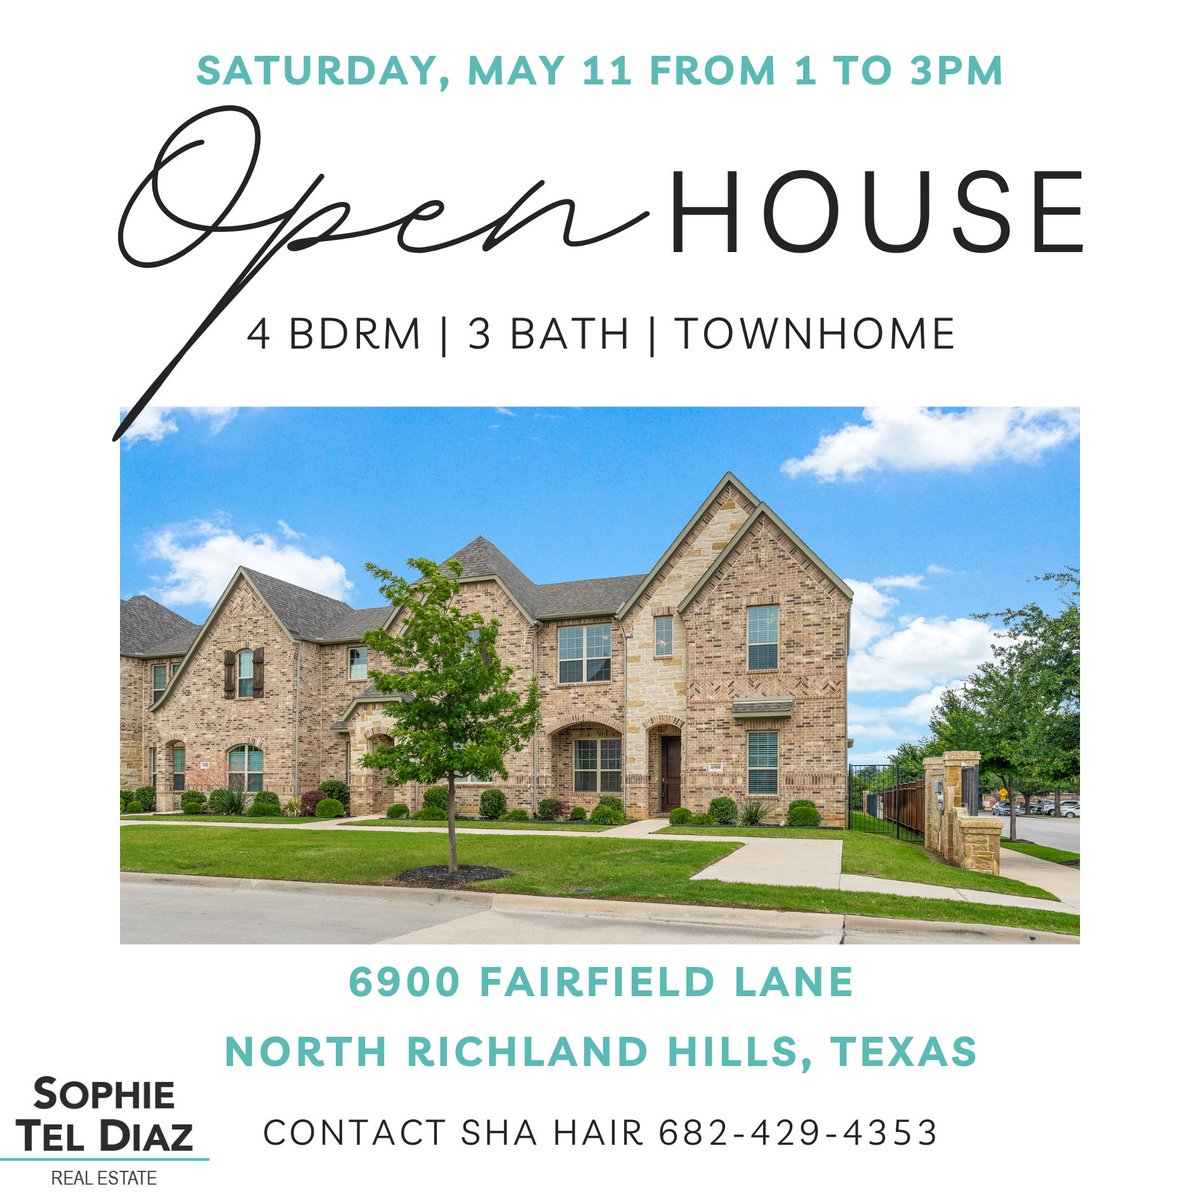 Open House Today!🎉
Saturday, May 11 from 1 to 3pm
📍6900 Fairfield Lane, North Richland Hills, TX
Offered at $515,000
Call or Text Sha at 682-429-4353
#OpenHouse  #openhousesaturday #dfwrealestate #texasrealestate #shahairrealtor #shasellsrealestate #dfwrealtor